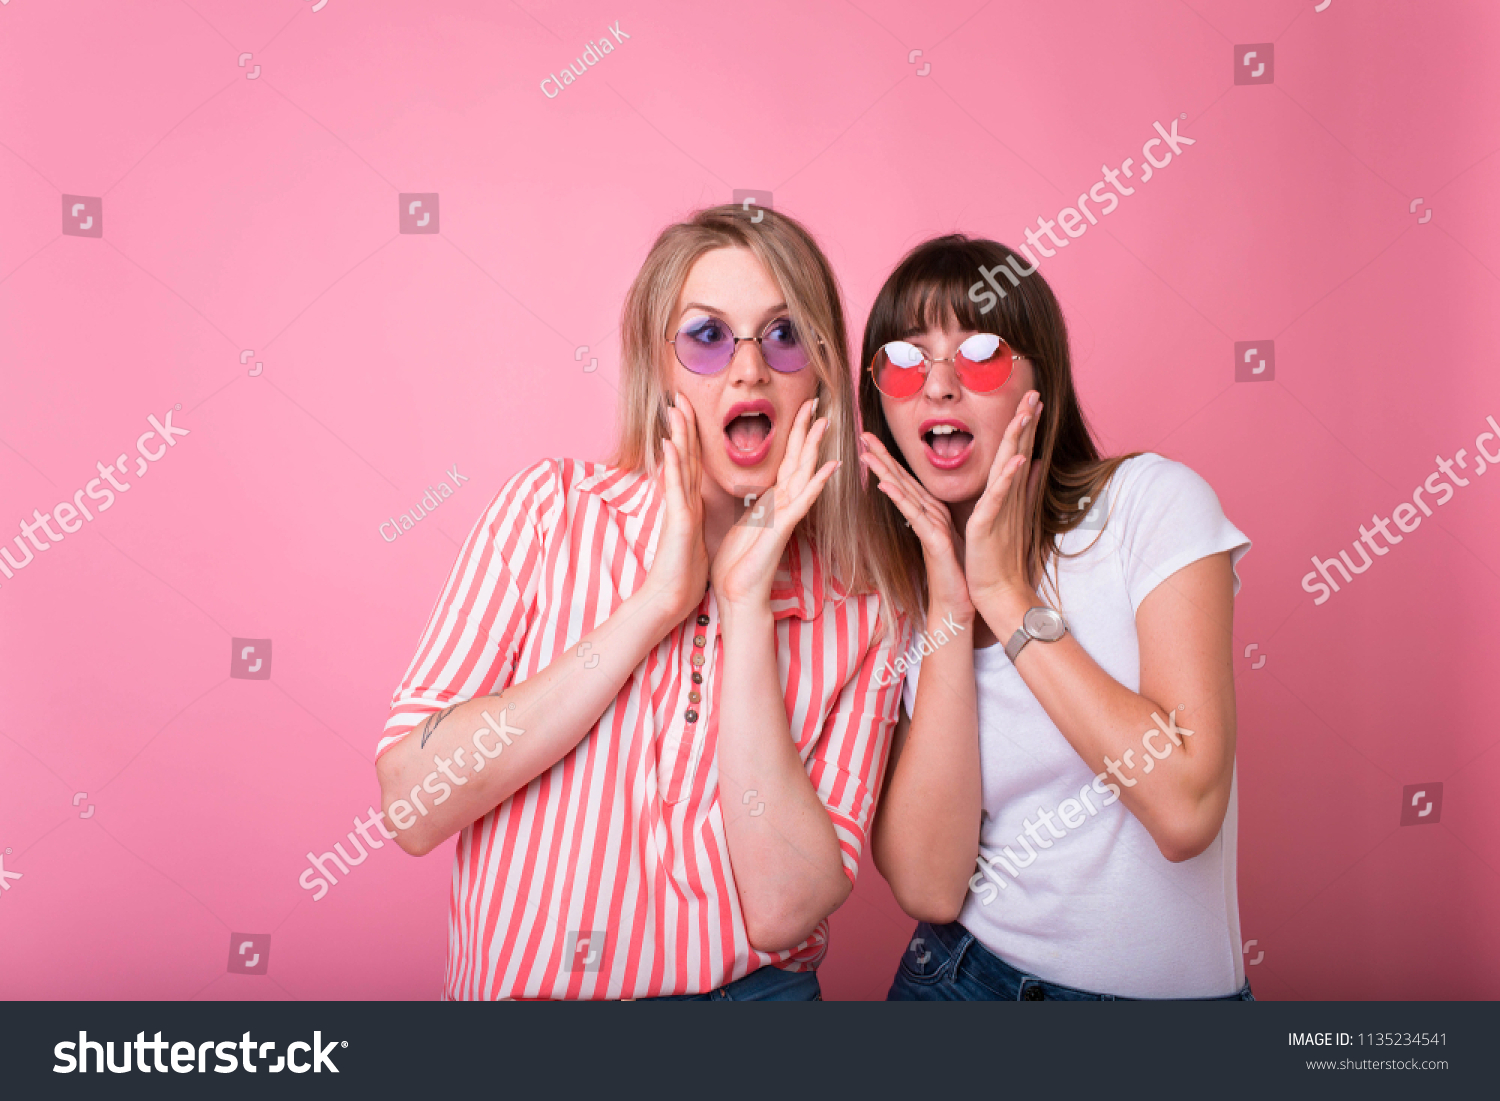 Two cheerful excited young women shouting over pink background.Studio shot of two scared Caucasian female student. raising brows and keeping hands on faces #1135234541